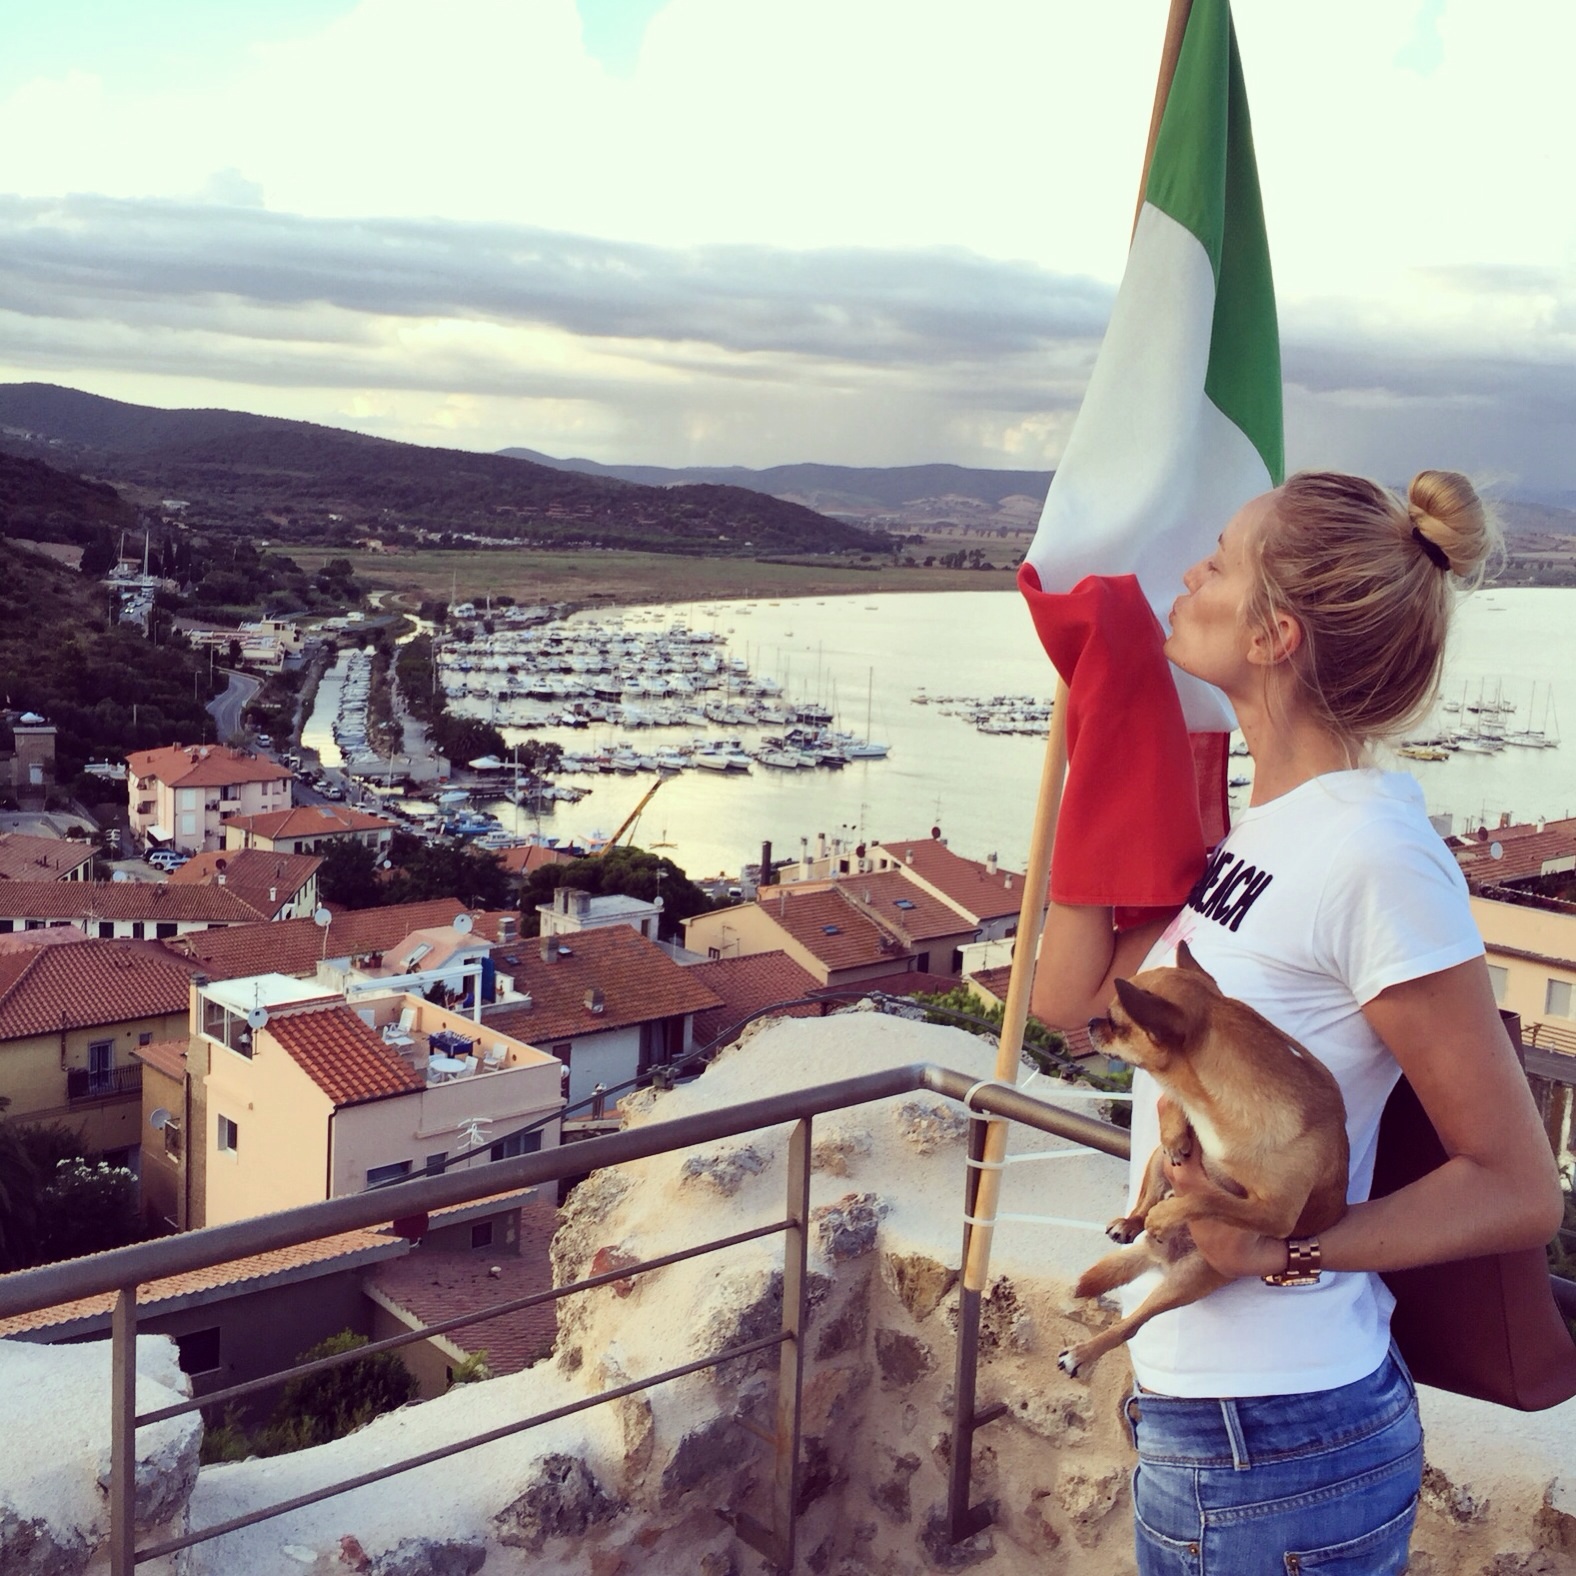 Italia, ti ho ed avrò sempre nel cuore. Italy, I have and will always have you in my heart. #Talamone